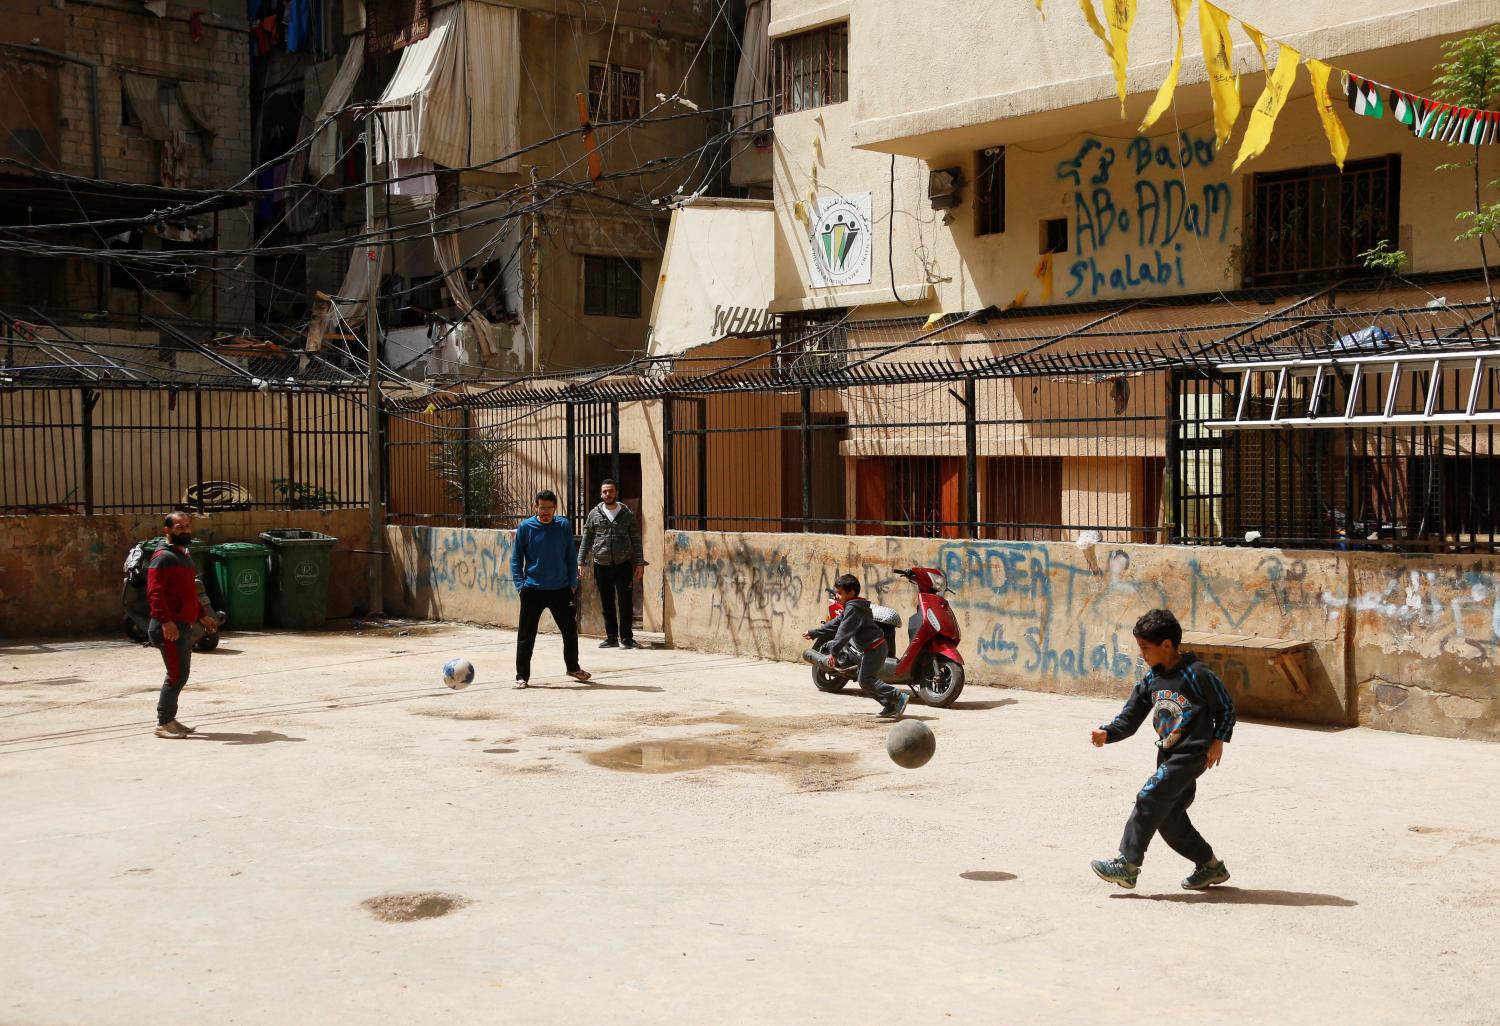 Boys play with balls in Shatila Palestinian refugee camp, as the spread of coronavirus disease (COVID-19) continues, in Beirut suburbs, Lebanon March 30, 2020. Picture taken March 30, 2020. REUTERS/Mohamed Azakir